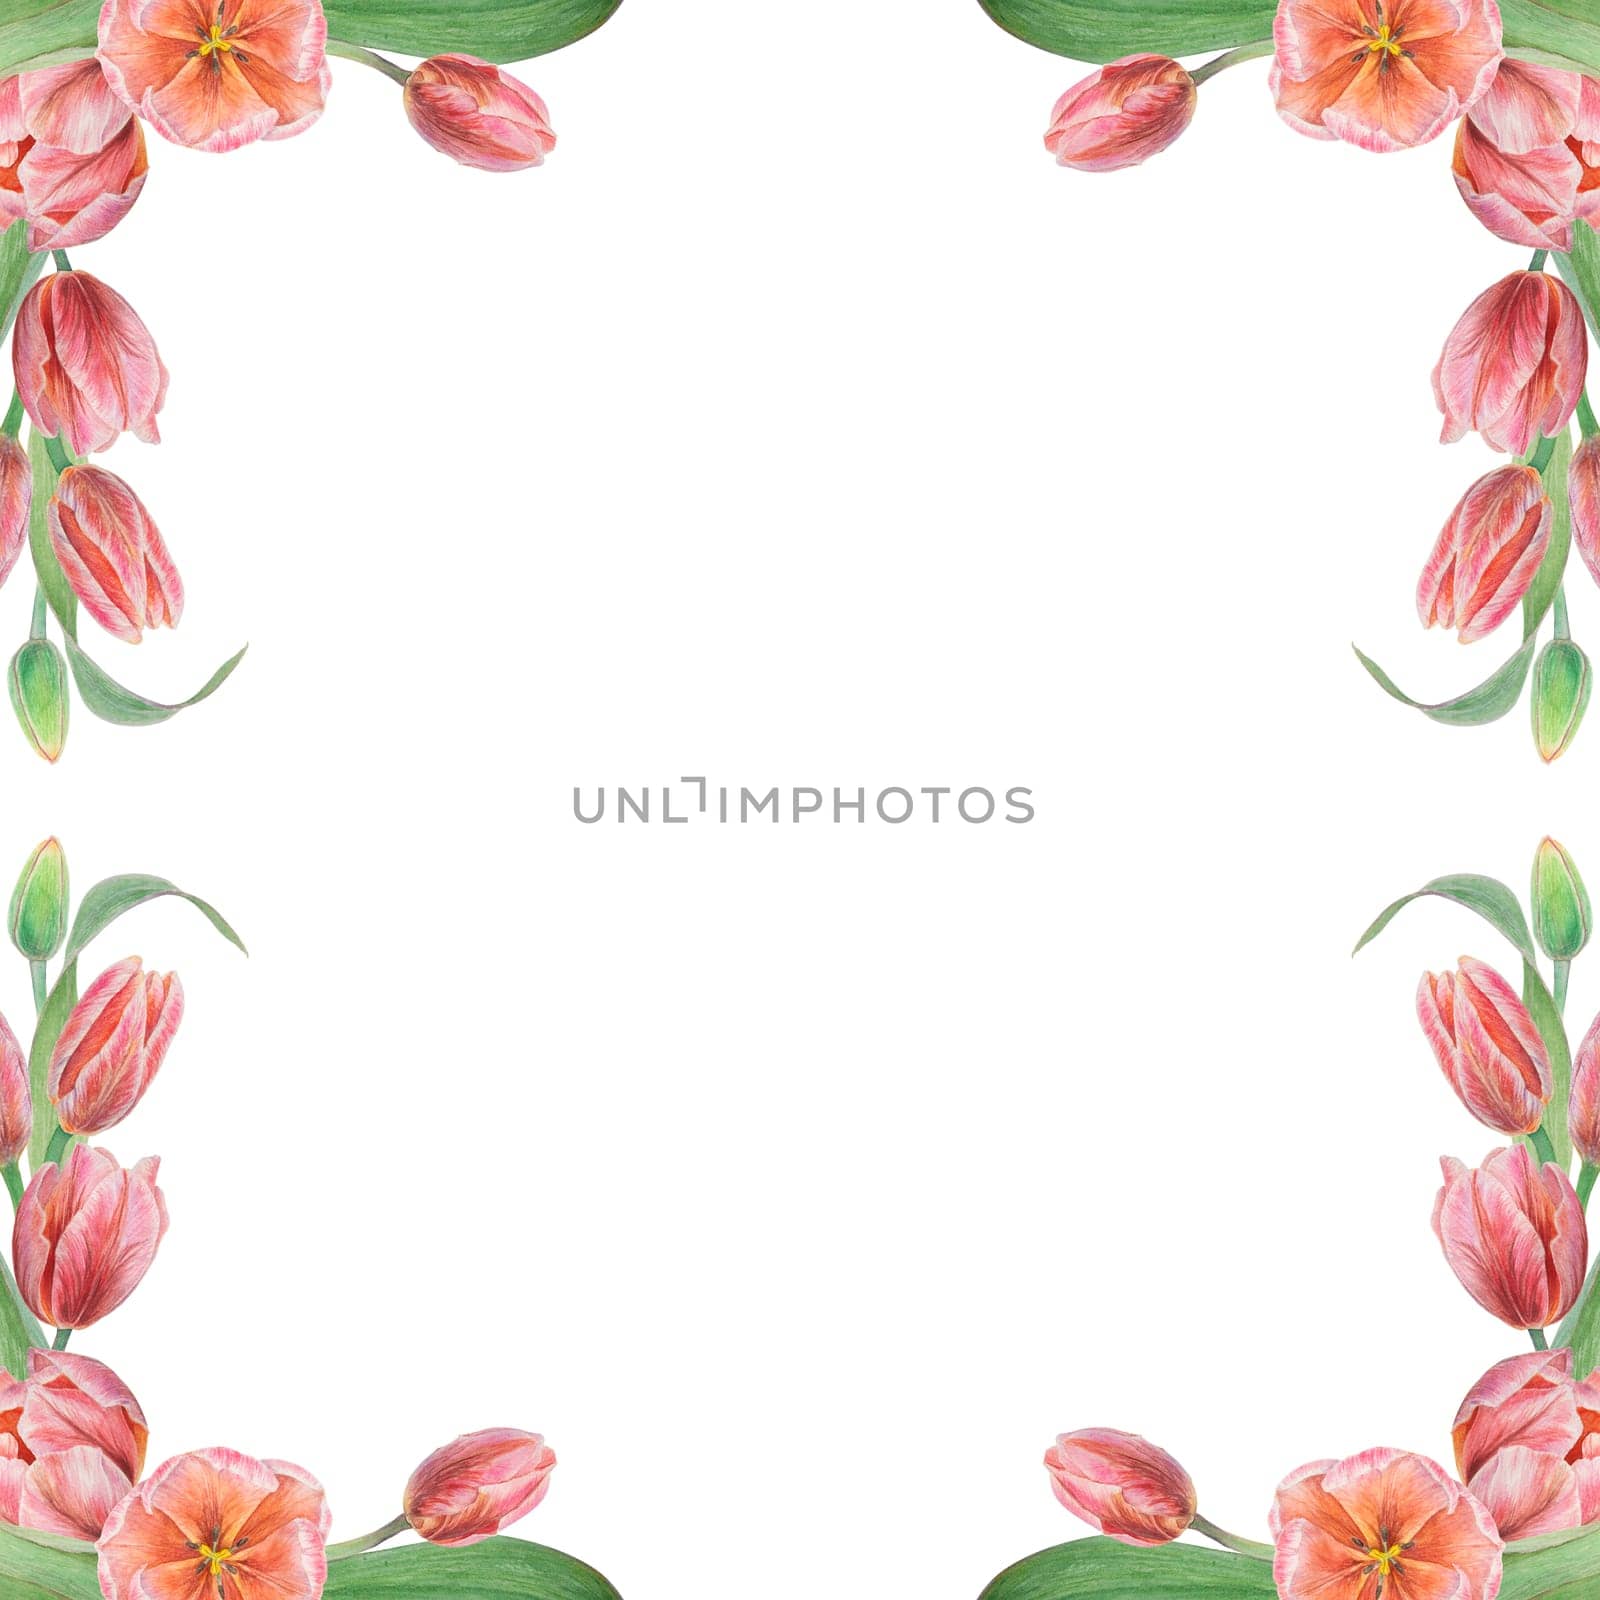 Pink tulips frame painted in watercolor, realistic botanical hand drawn illustration isolated on white background for design, wedding print products, paper, invitations, cards, fabric, posters, card for Mother's day, March 8, Easter, festivals